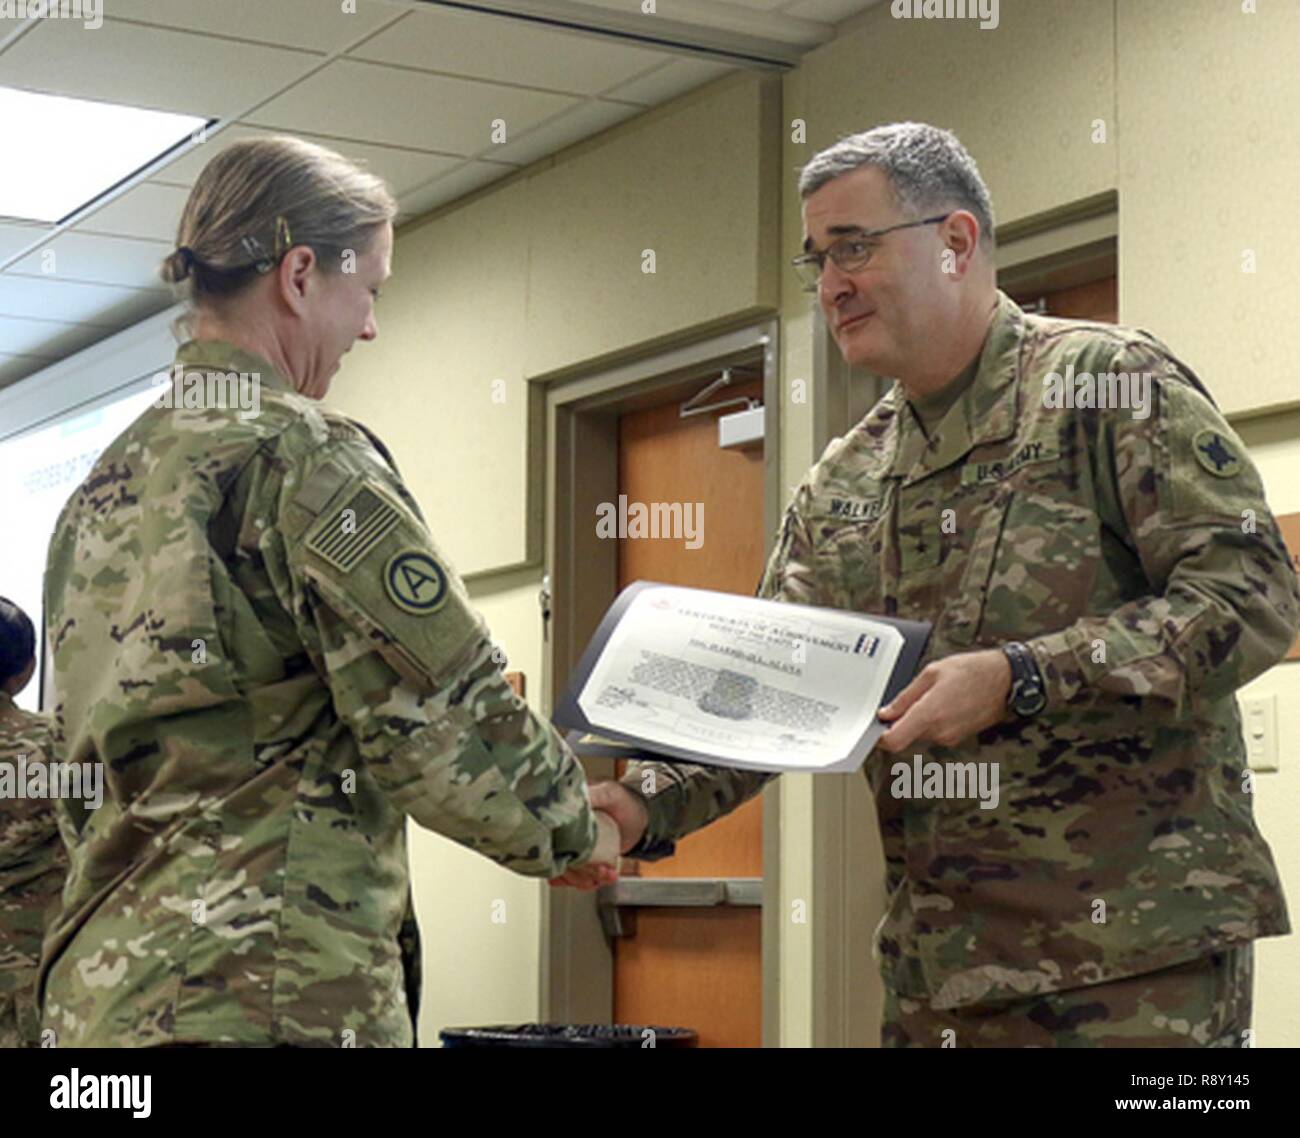 Staff Sgt. Alana Harrigill, 184th Sustainment Command receives a Hero of The Battle certificate from Brig. Gen. Clint E. Walker, 184 SC commander. Harrigill was awarded for her professionalism and proficiency during the units validation for the upcoming deployment. Stock Photo